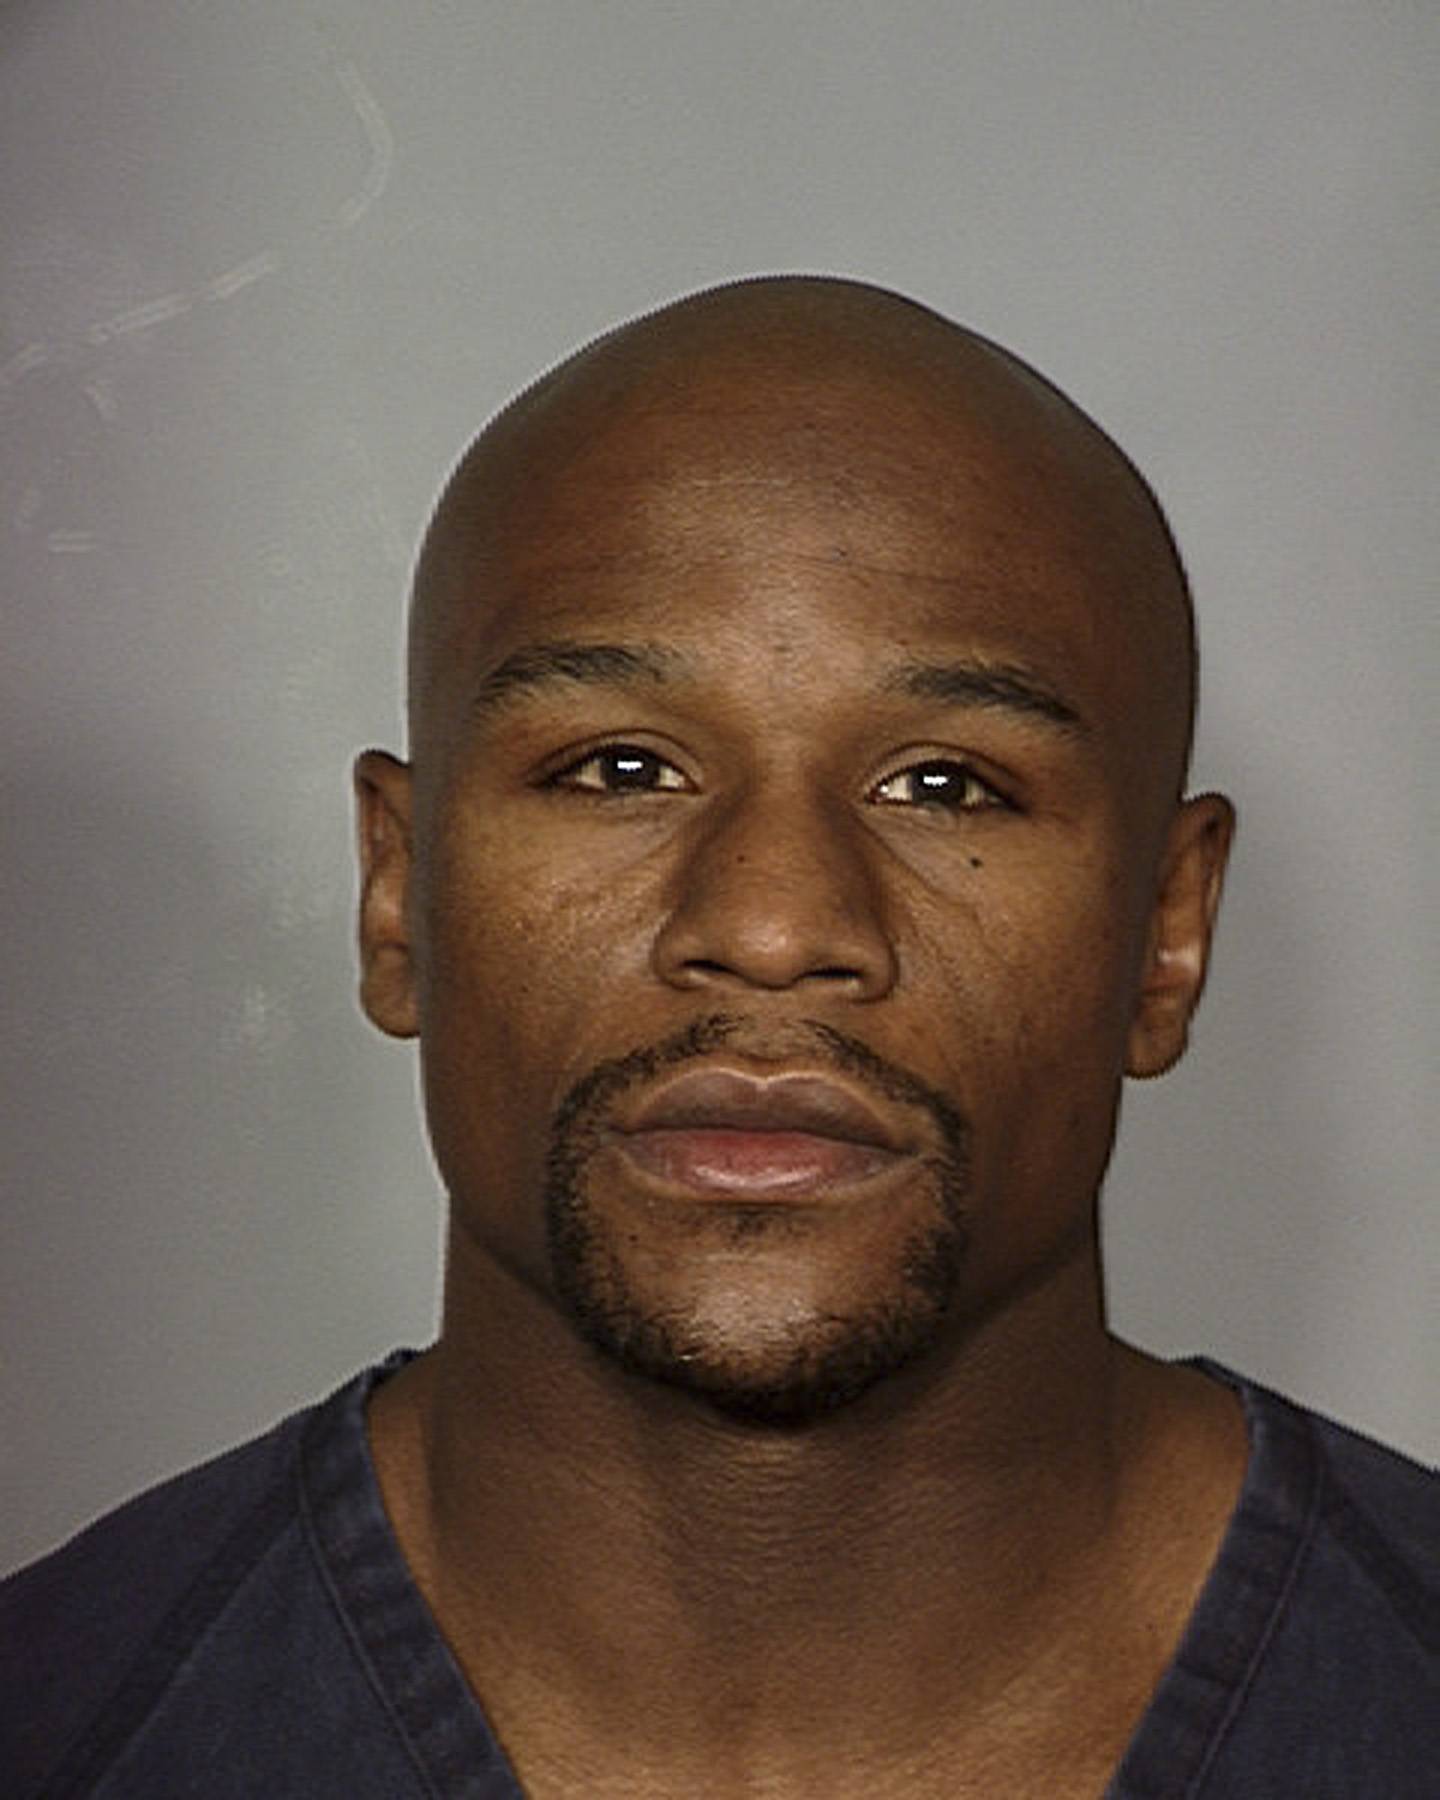 Mayweather to Stay Behind Bars - Floyd Mayweather Jr. won’t be handed a &quot;get-out-of-jail&quot; free card and instead will finish out his 90-day sentence behind pars, a Las Vegas judge ruled on June 15. The undefeated boxer asked to be released from jail because the low-quality food and water provided threatened his health and his boxing career. He’s serving three months in jail after pleading guilty to domestic abuse charges last year. Separately, Forbes named Mayweather No. 1 on its list of 100 highest paid athletes. (Photo: AP Photo/Clark County Detention Center)